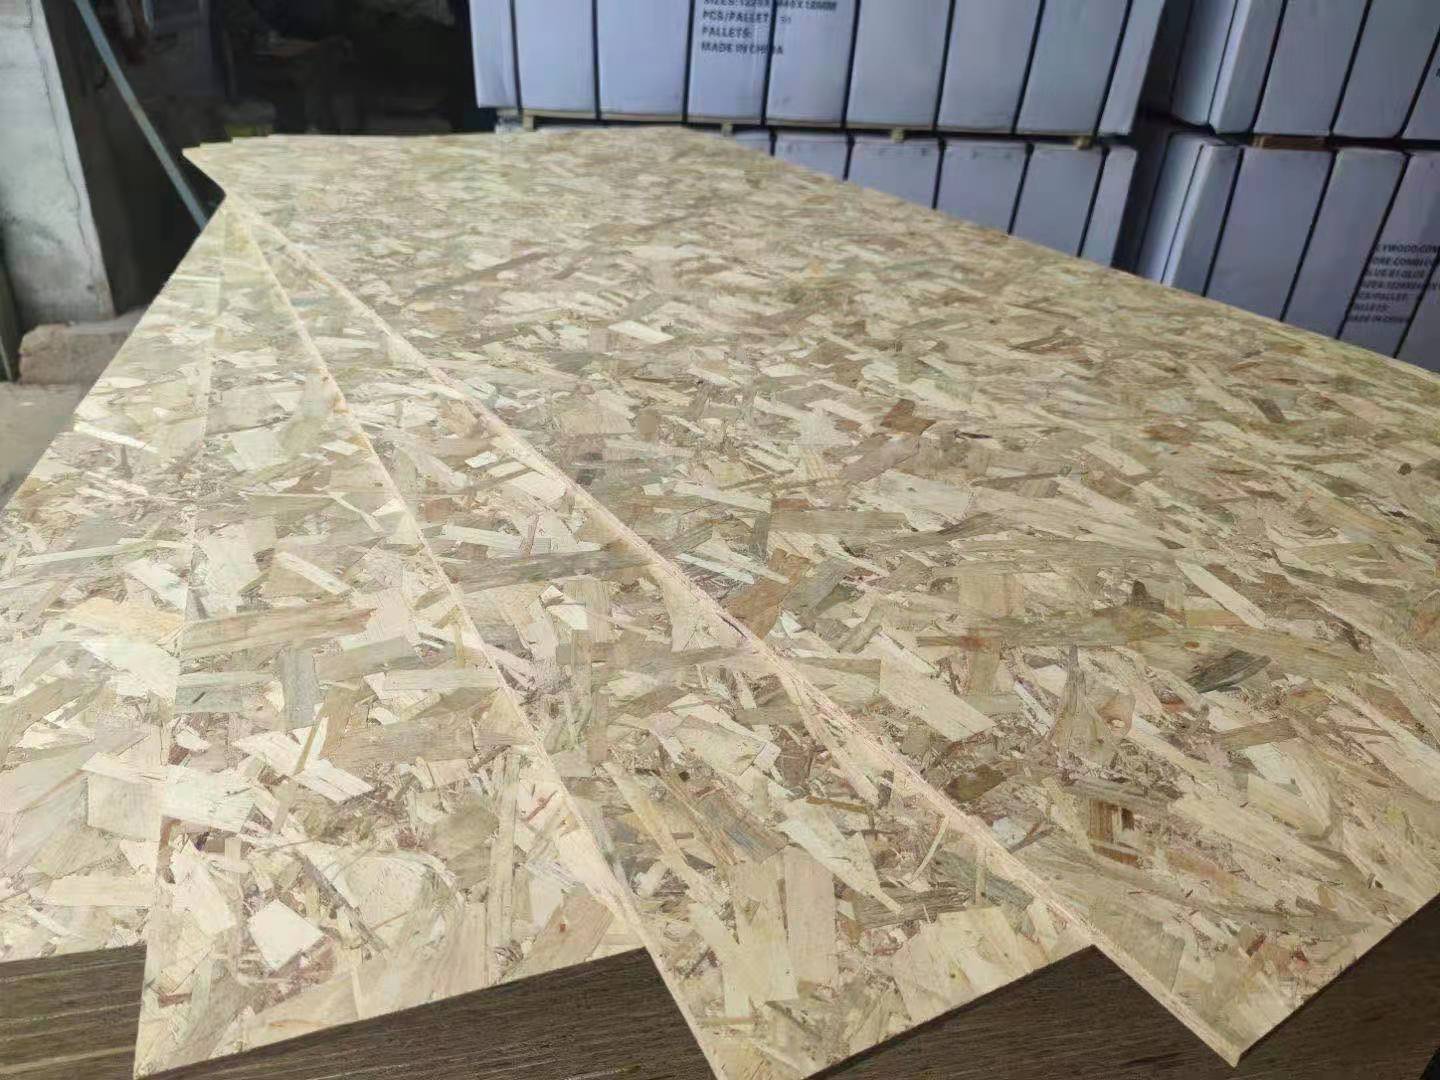 18mm OSB2 Polar Material Indoor OSB for Russia Market From China Linyi Manufacturer